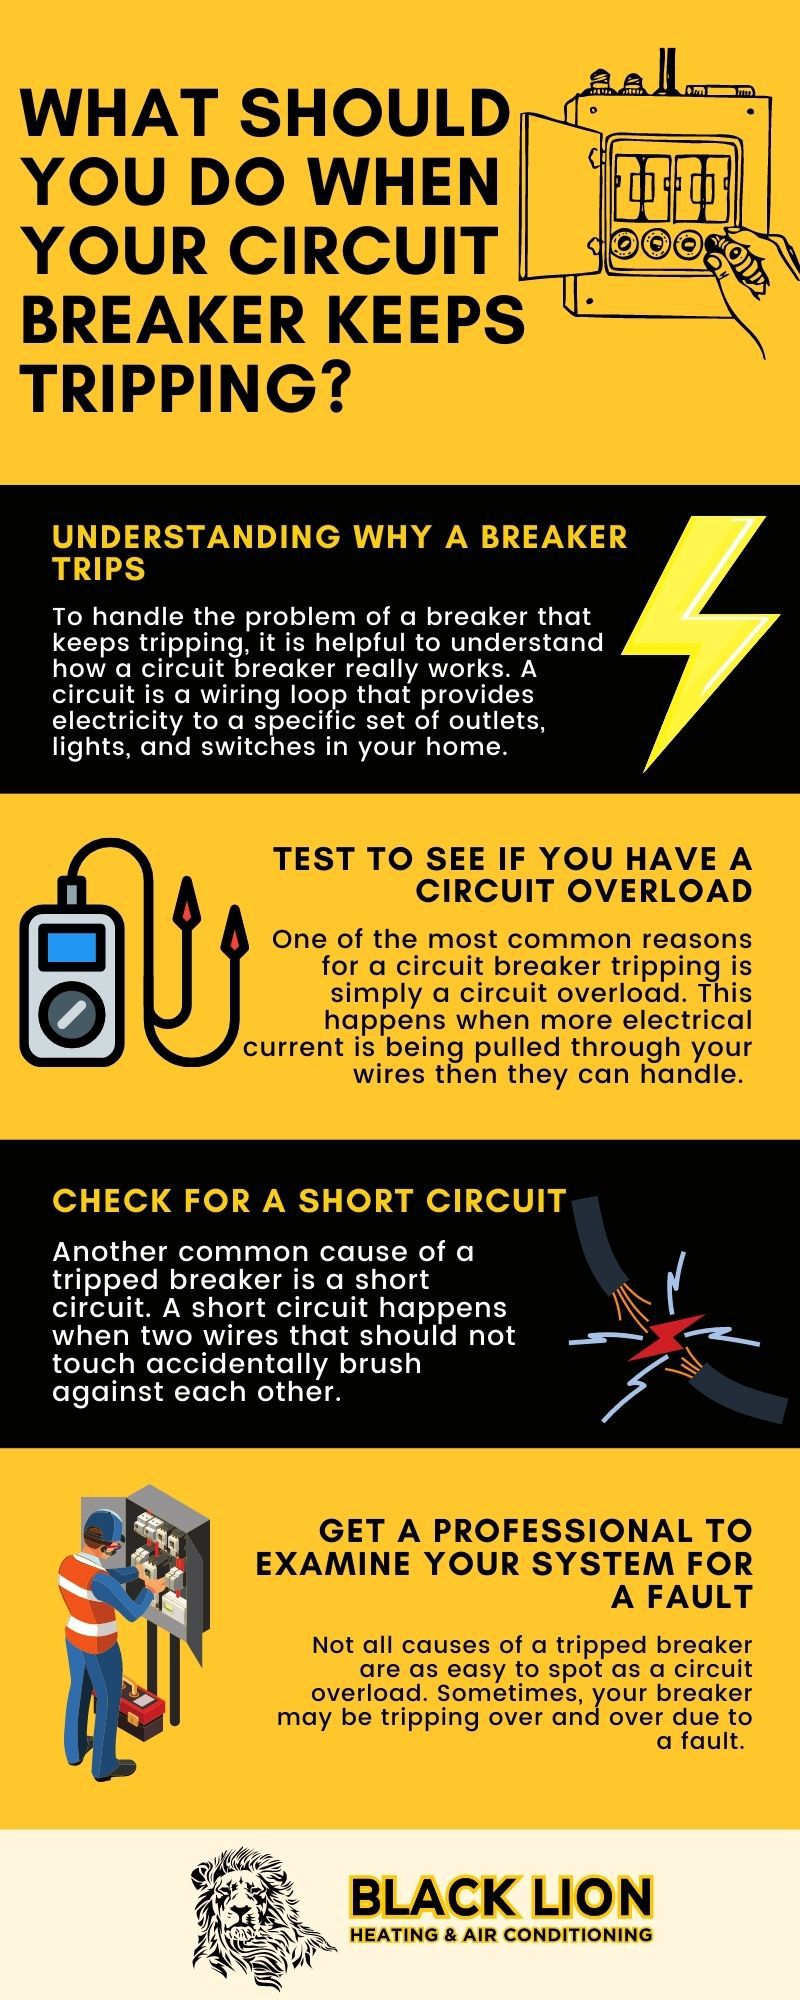 What Should You Do When your Circuit Breaker Keeps Tripping